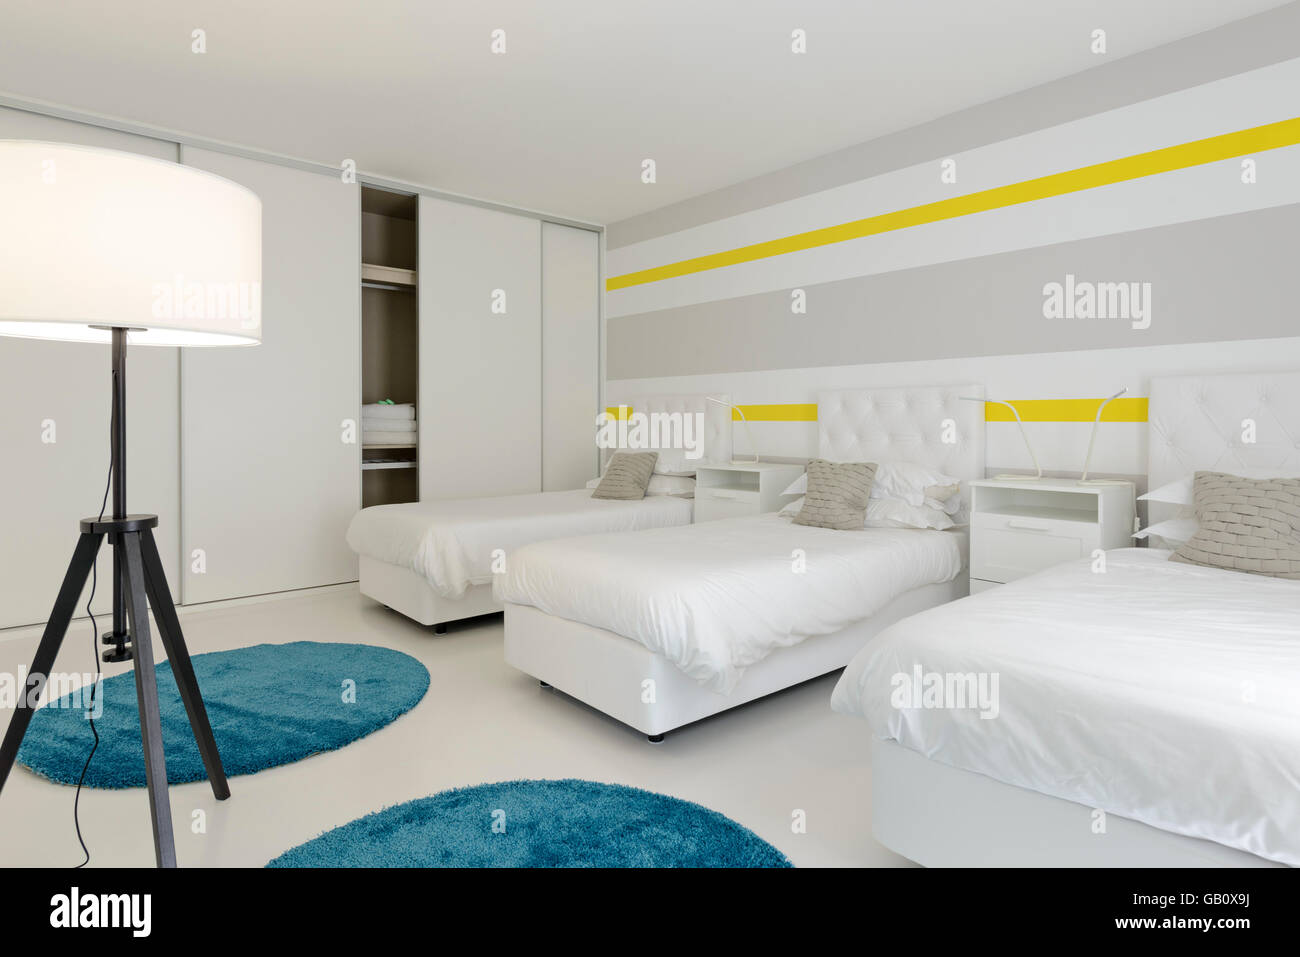 Three beds side by side in an hotel room Stock Photo